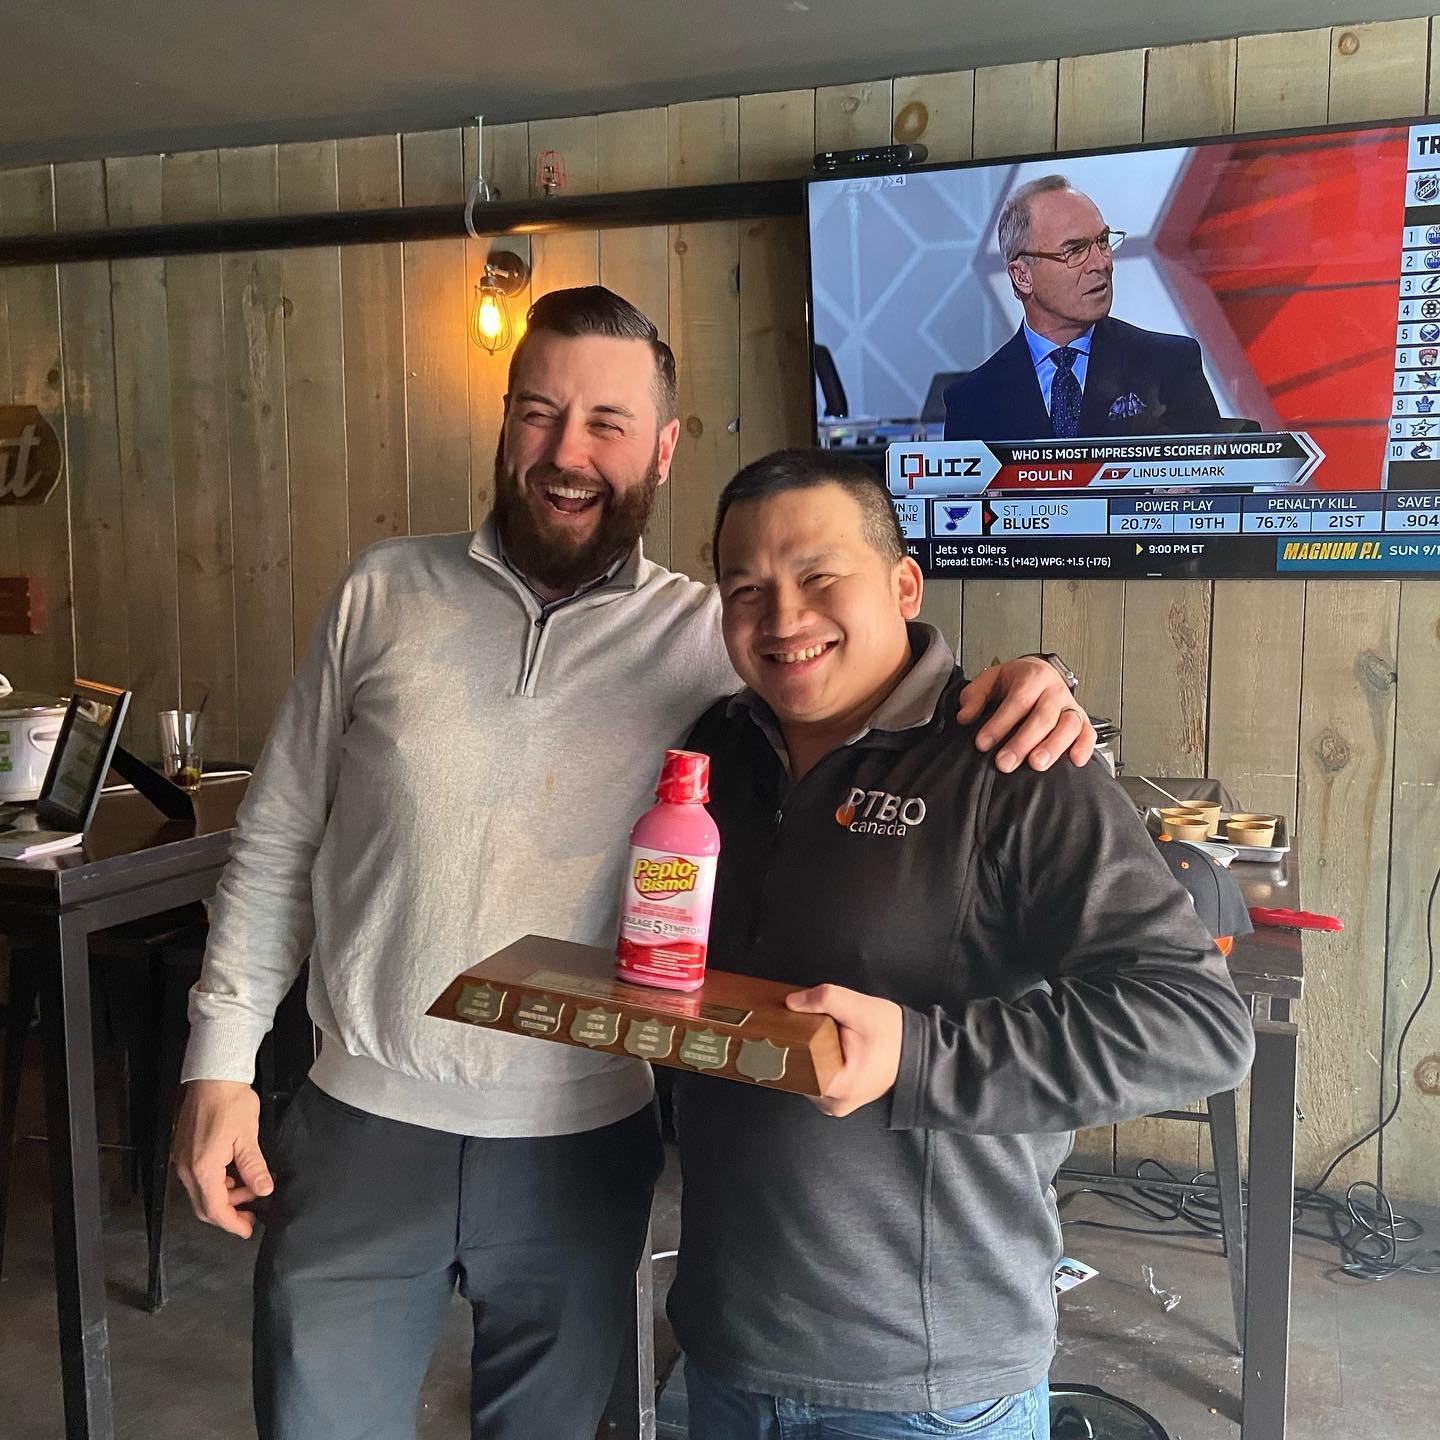 Brad Wood (left) and David Tuan Bui (right) winning the Pepto Bismol Chili Challenge trophy. The winning recipe was a maple bacon chili. Photo courtesy of Darling Insurance.